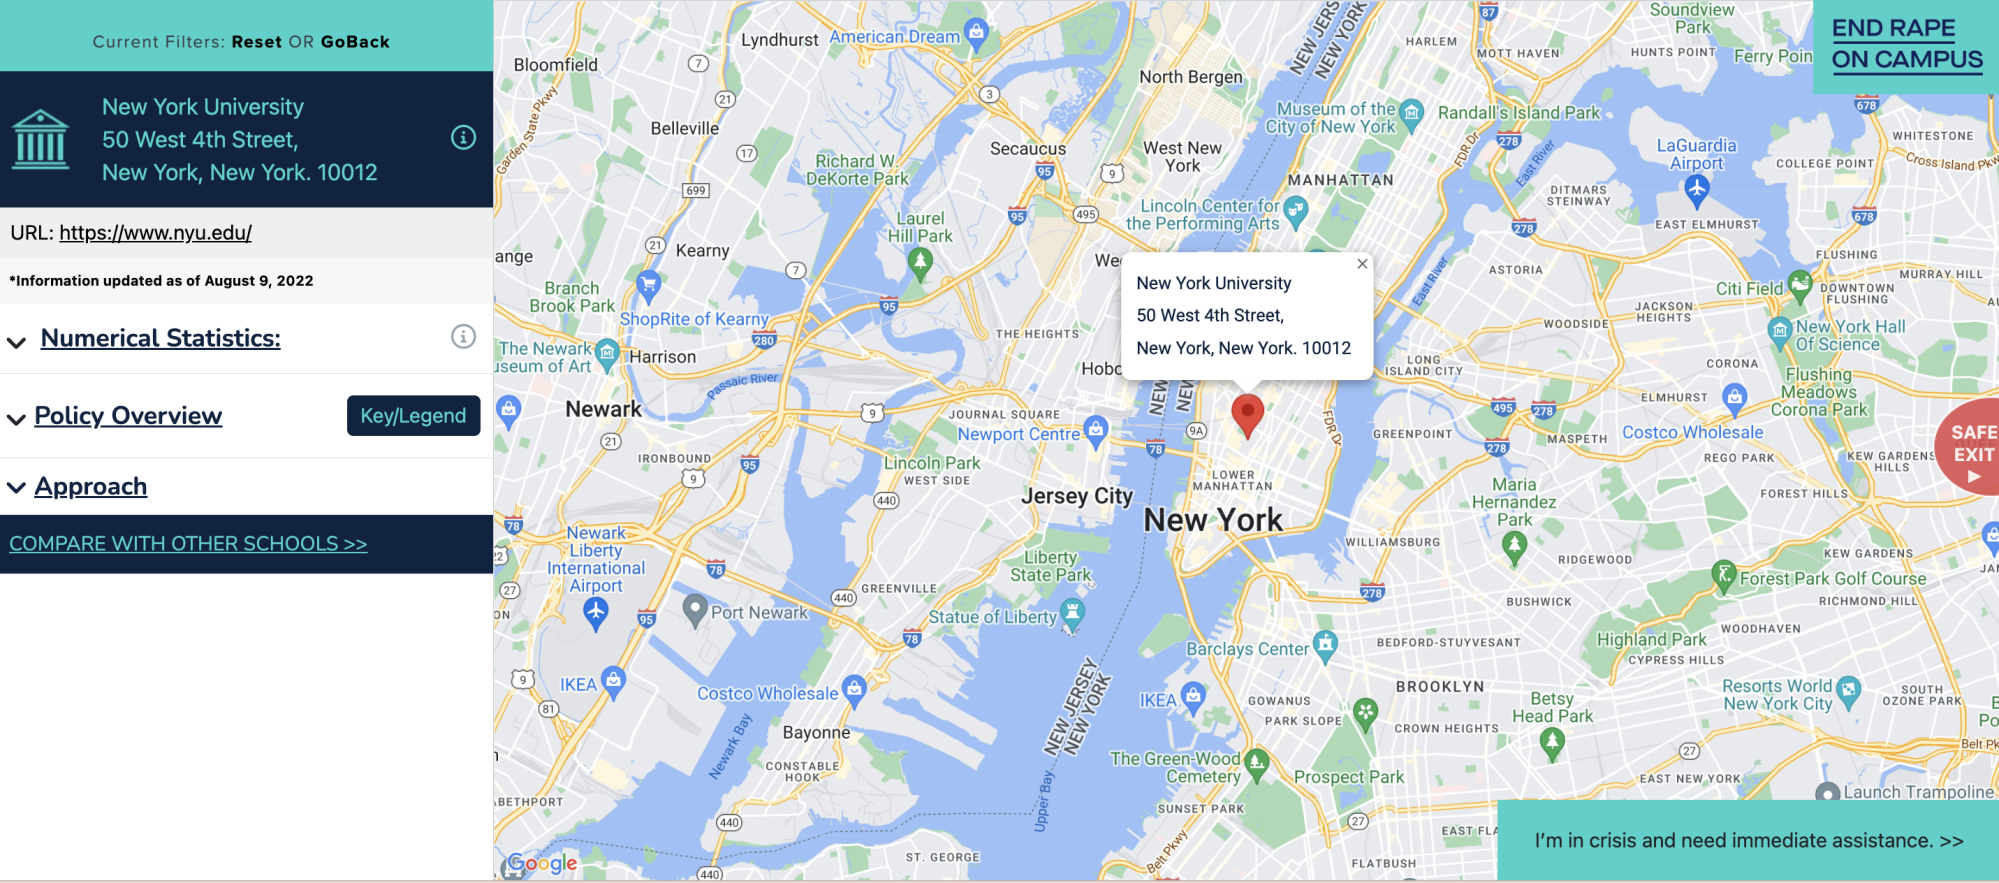 A screenshot of a map, showing a red location marker over the New York University address. To the left of the screen is a drop down menu that displays several information tools, including statistics, policies, and approaches to sexual assault.